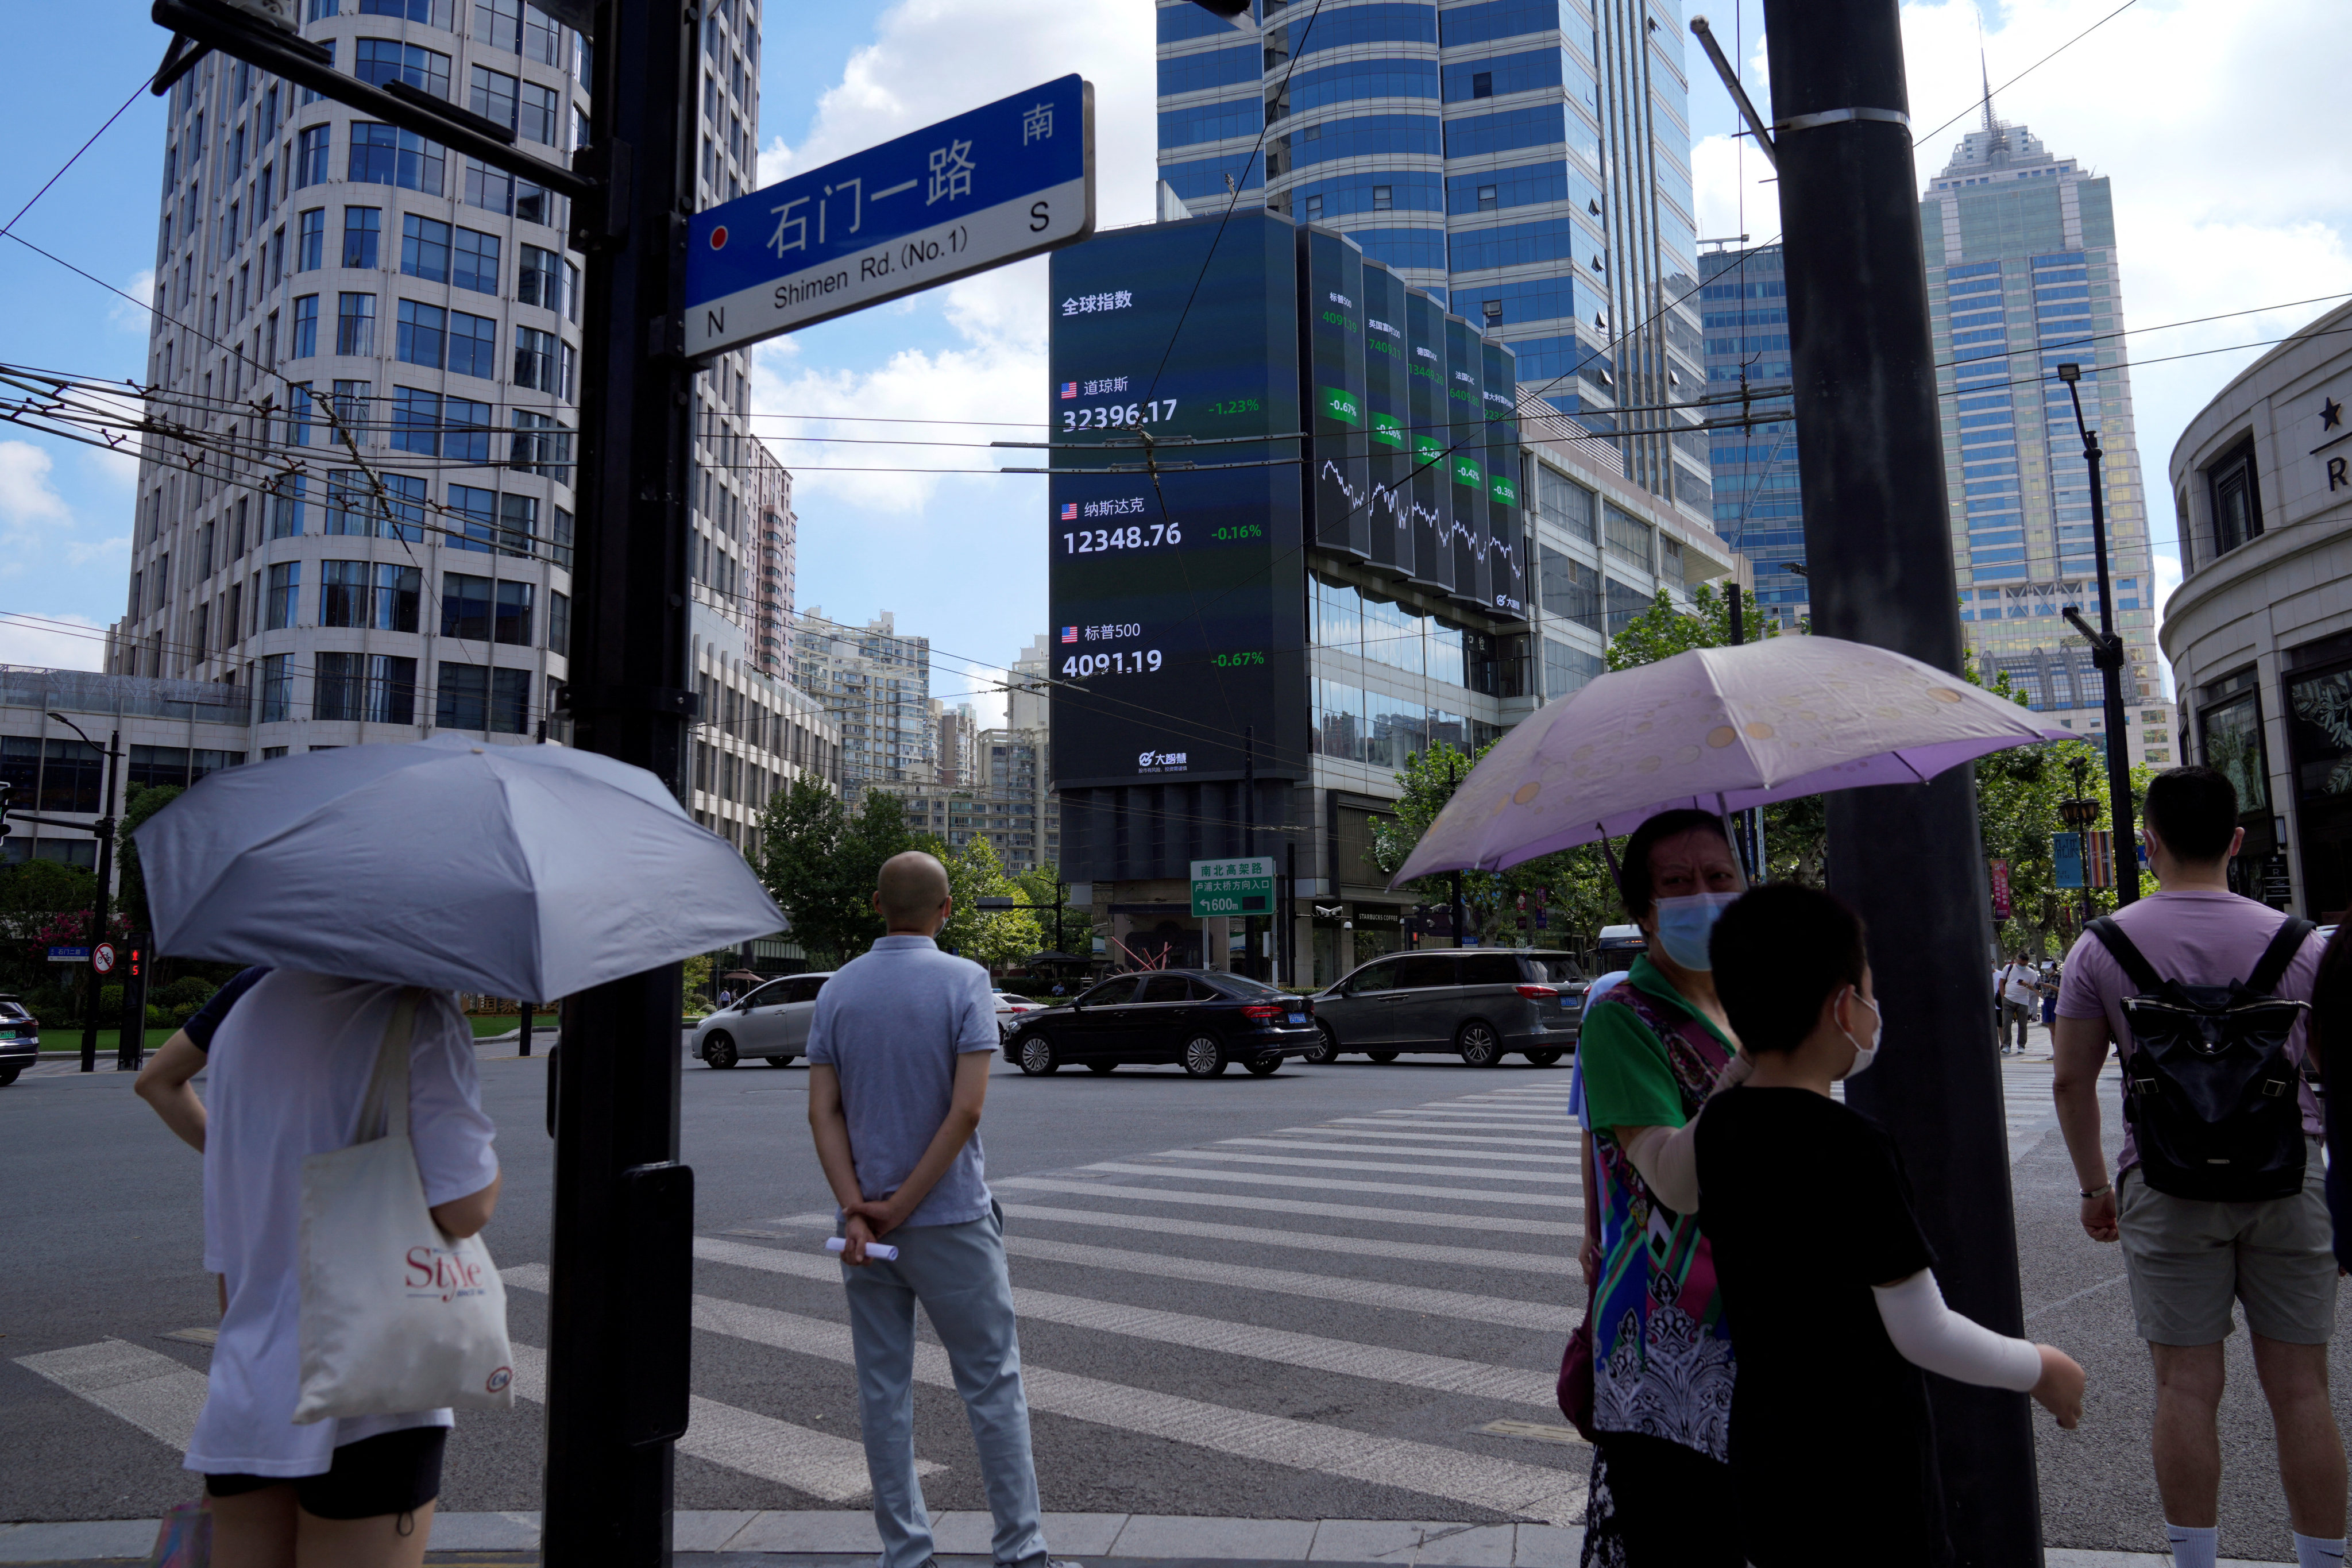 Pedestrians wait to cross a road at a junction near a giant display of stock indexes in Shanghai in August 2022. Photo: Reuters